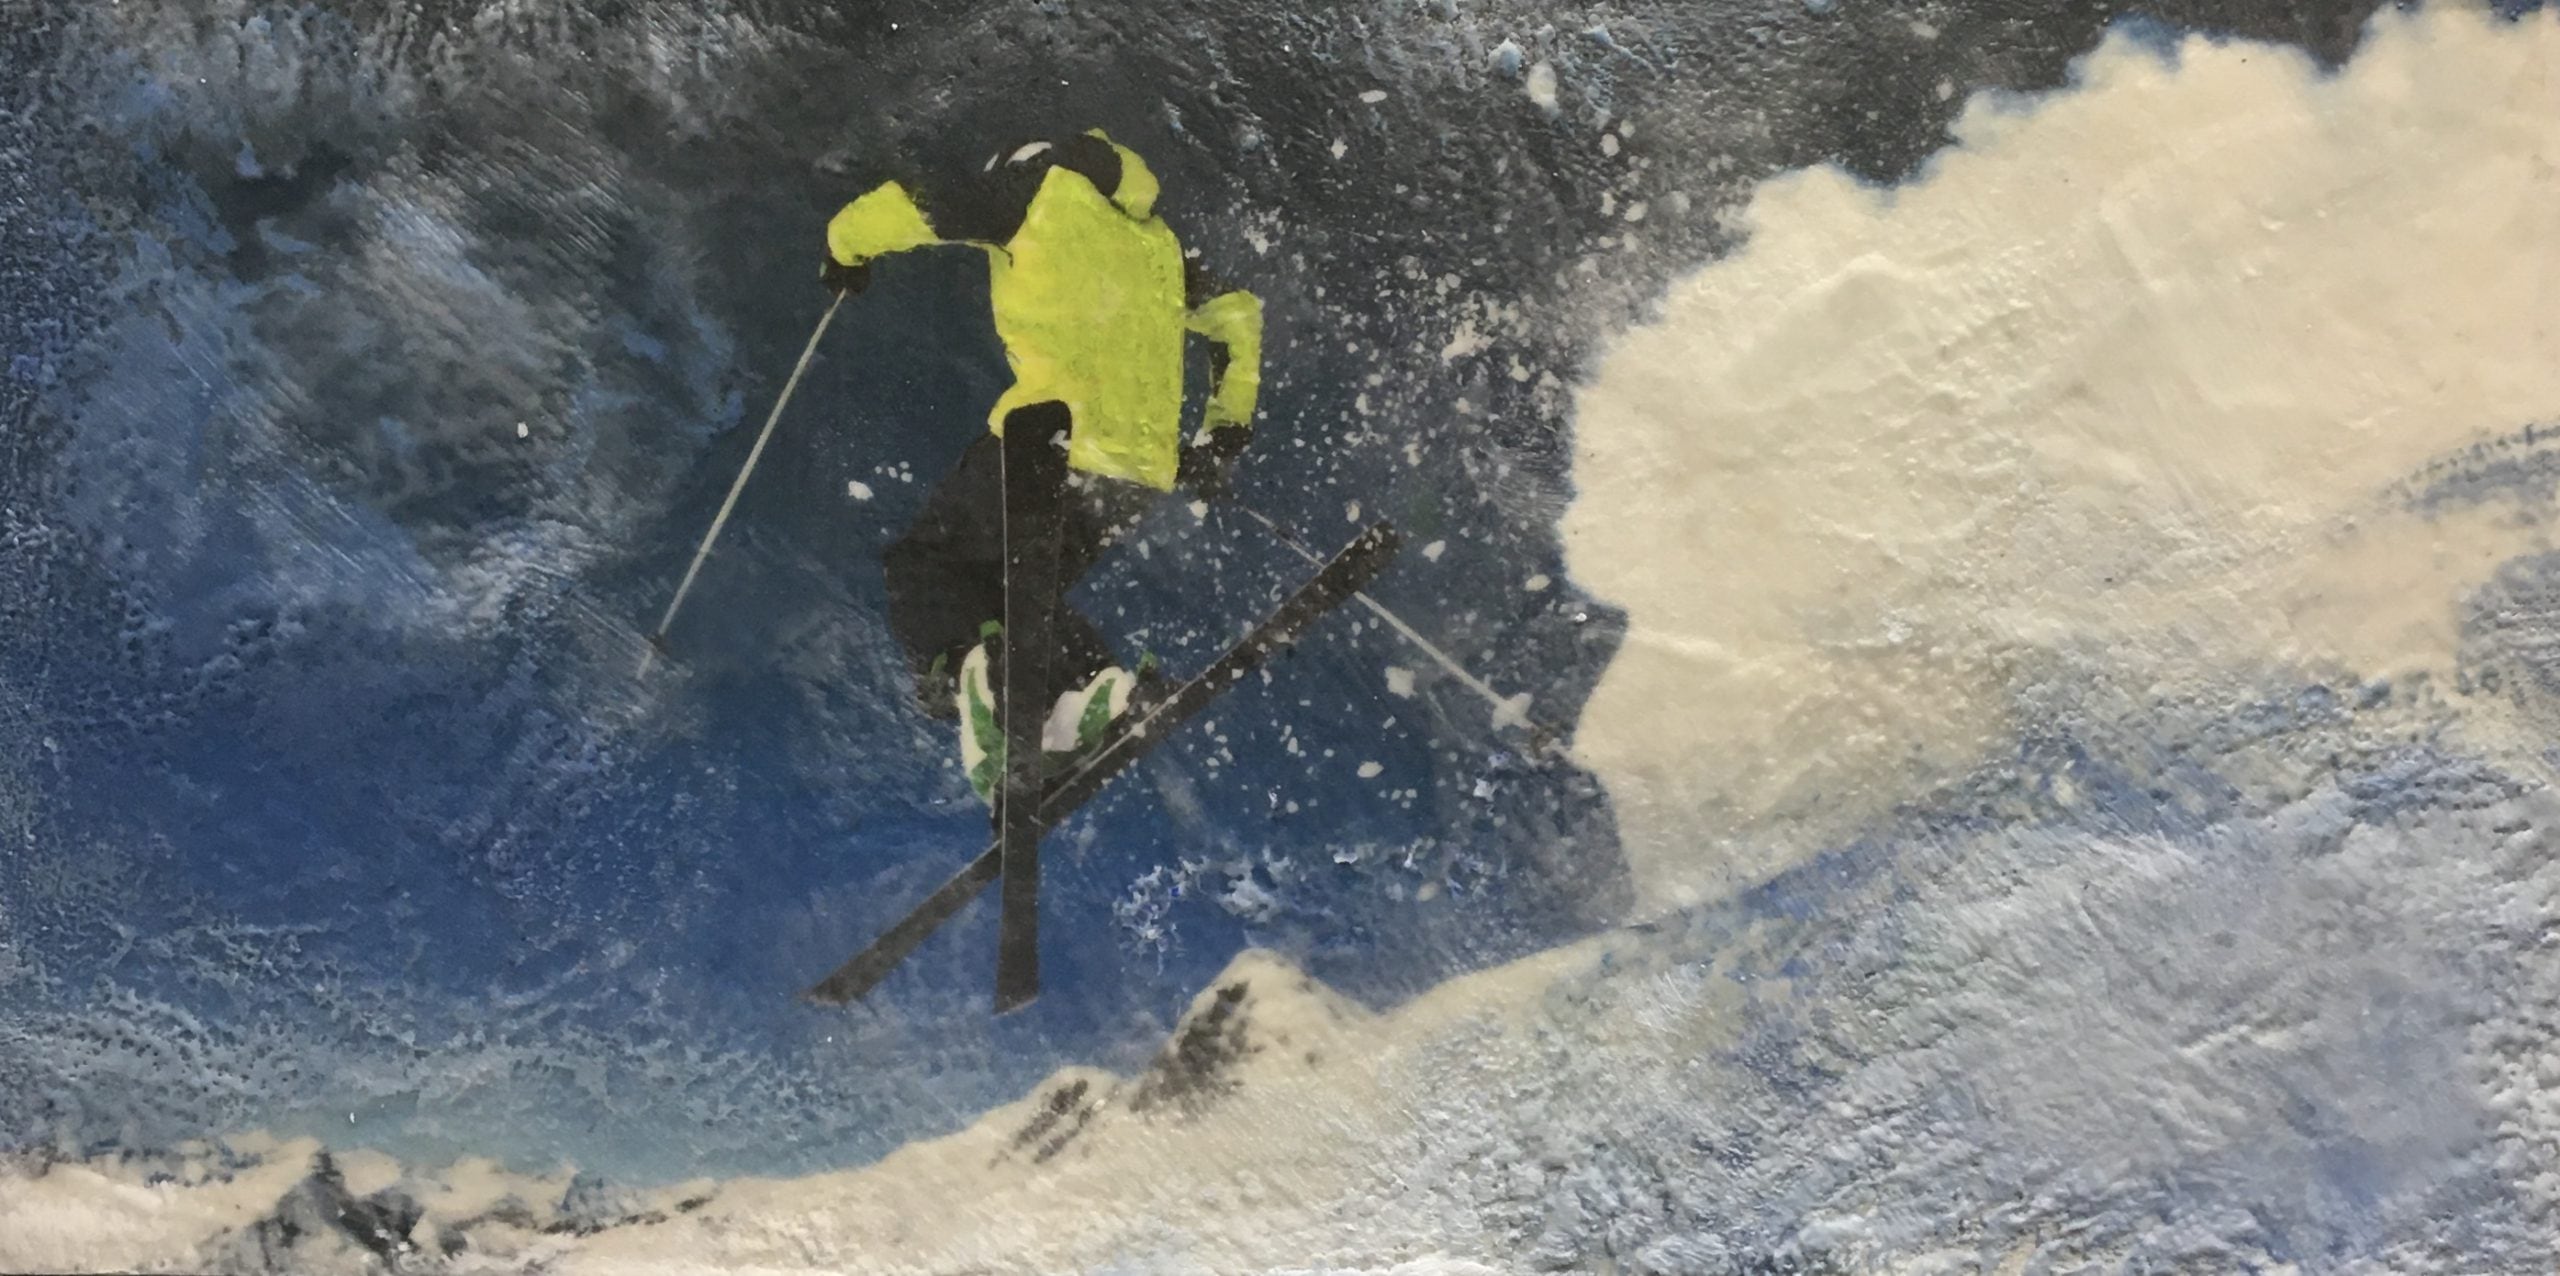 Deep Powder 2, encaustic ski painting by Lee Anne LaForge | Effusion Art Gallery + Cast Glass Studio, Invermere BC